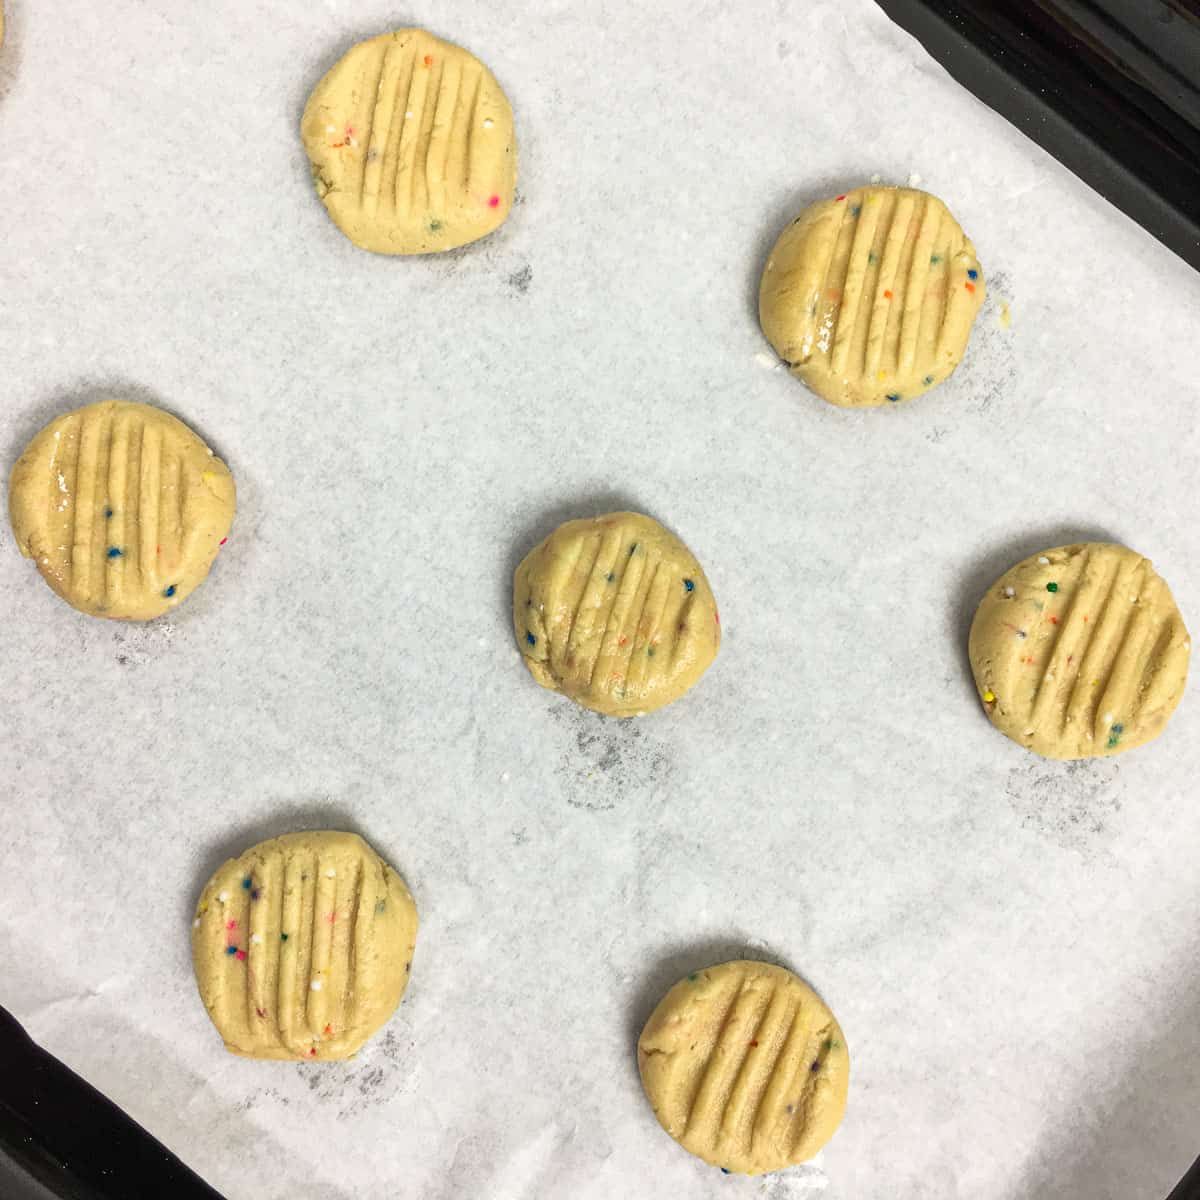 Round unbaked cookies on a parchment paper.